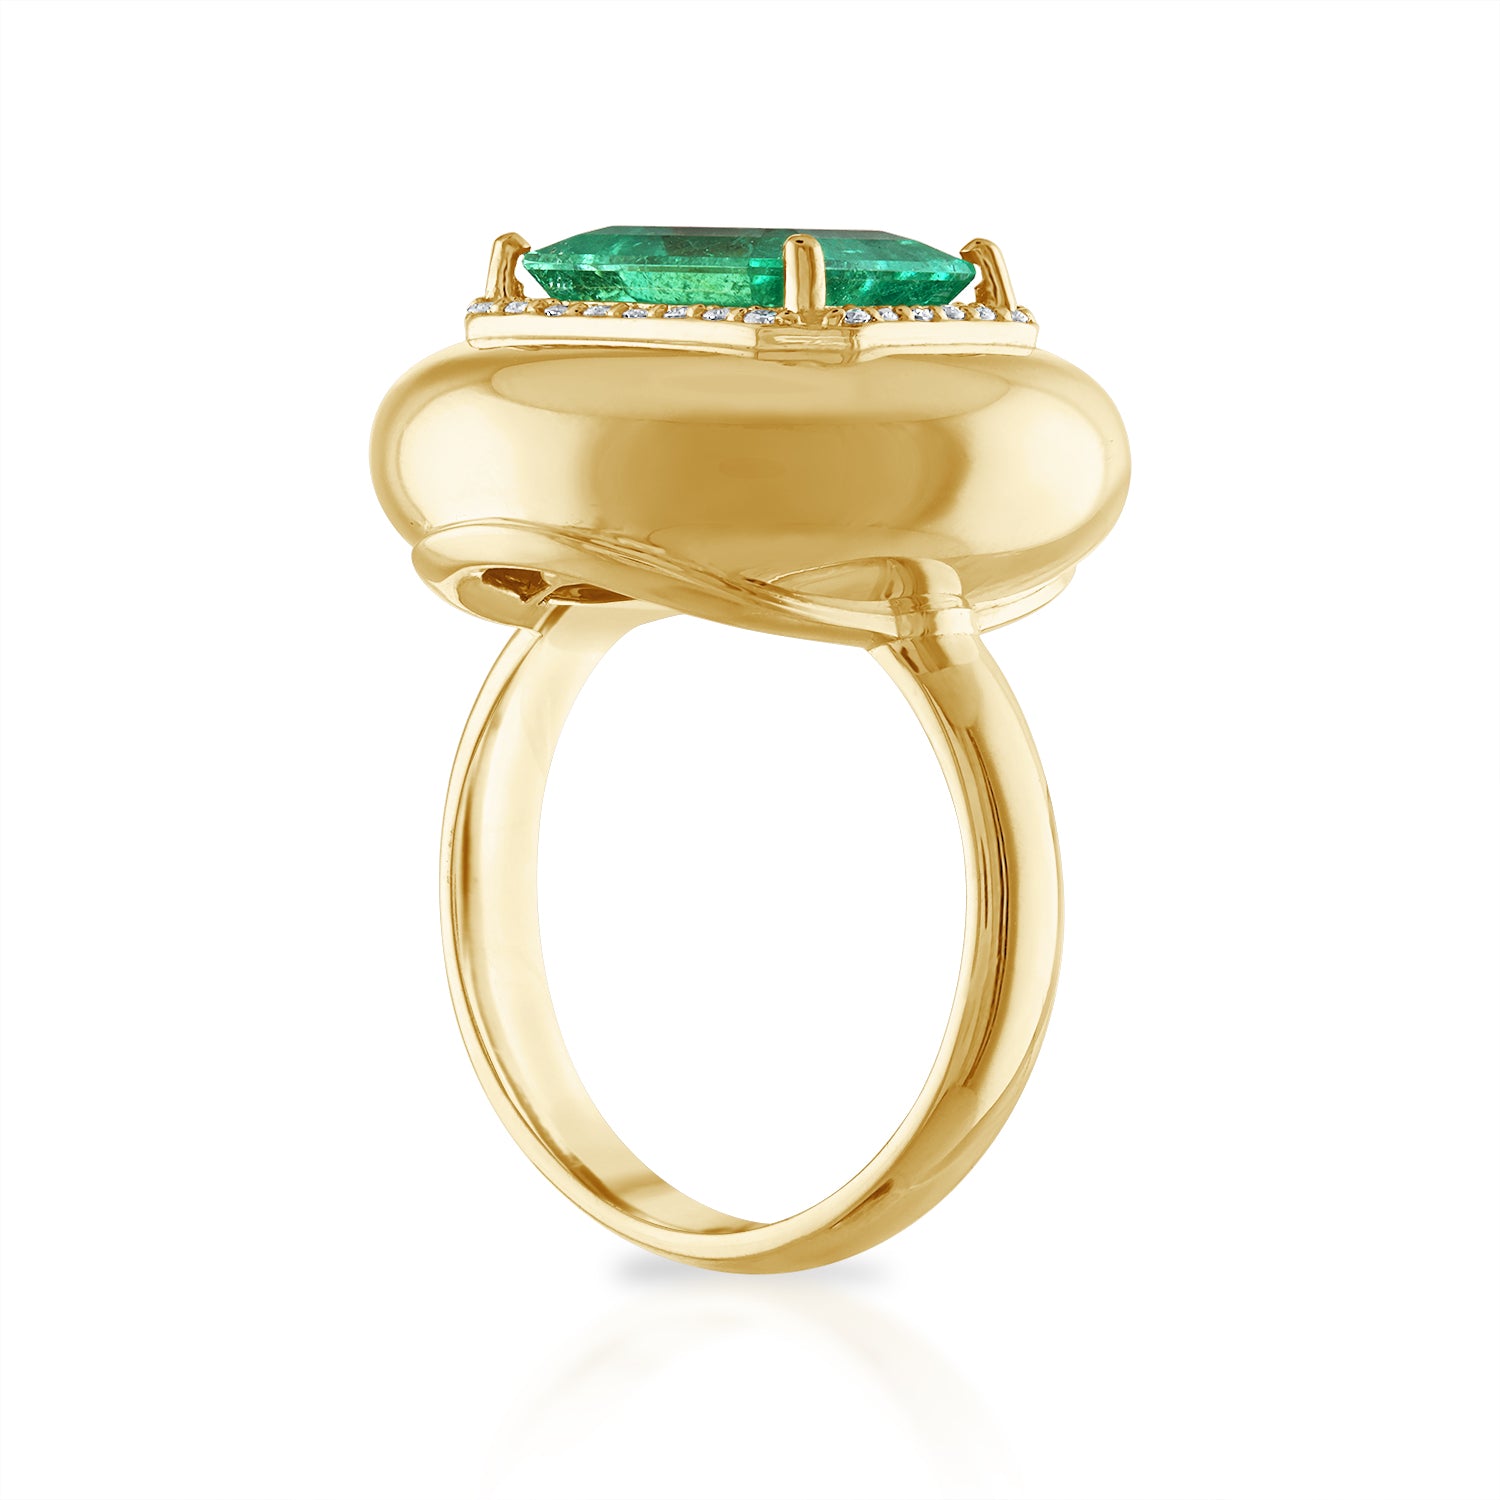 SOLD: 2.86ct Green Emerald Button Engagement Ring